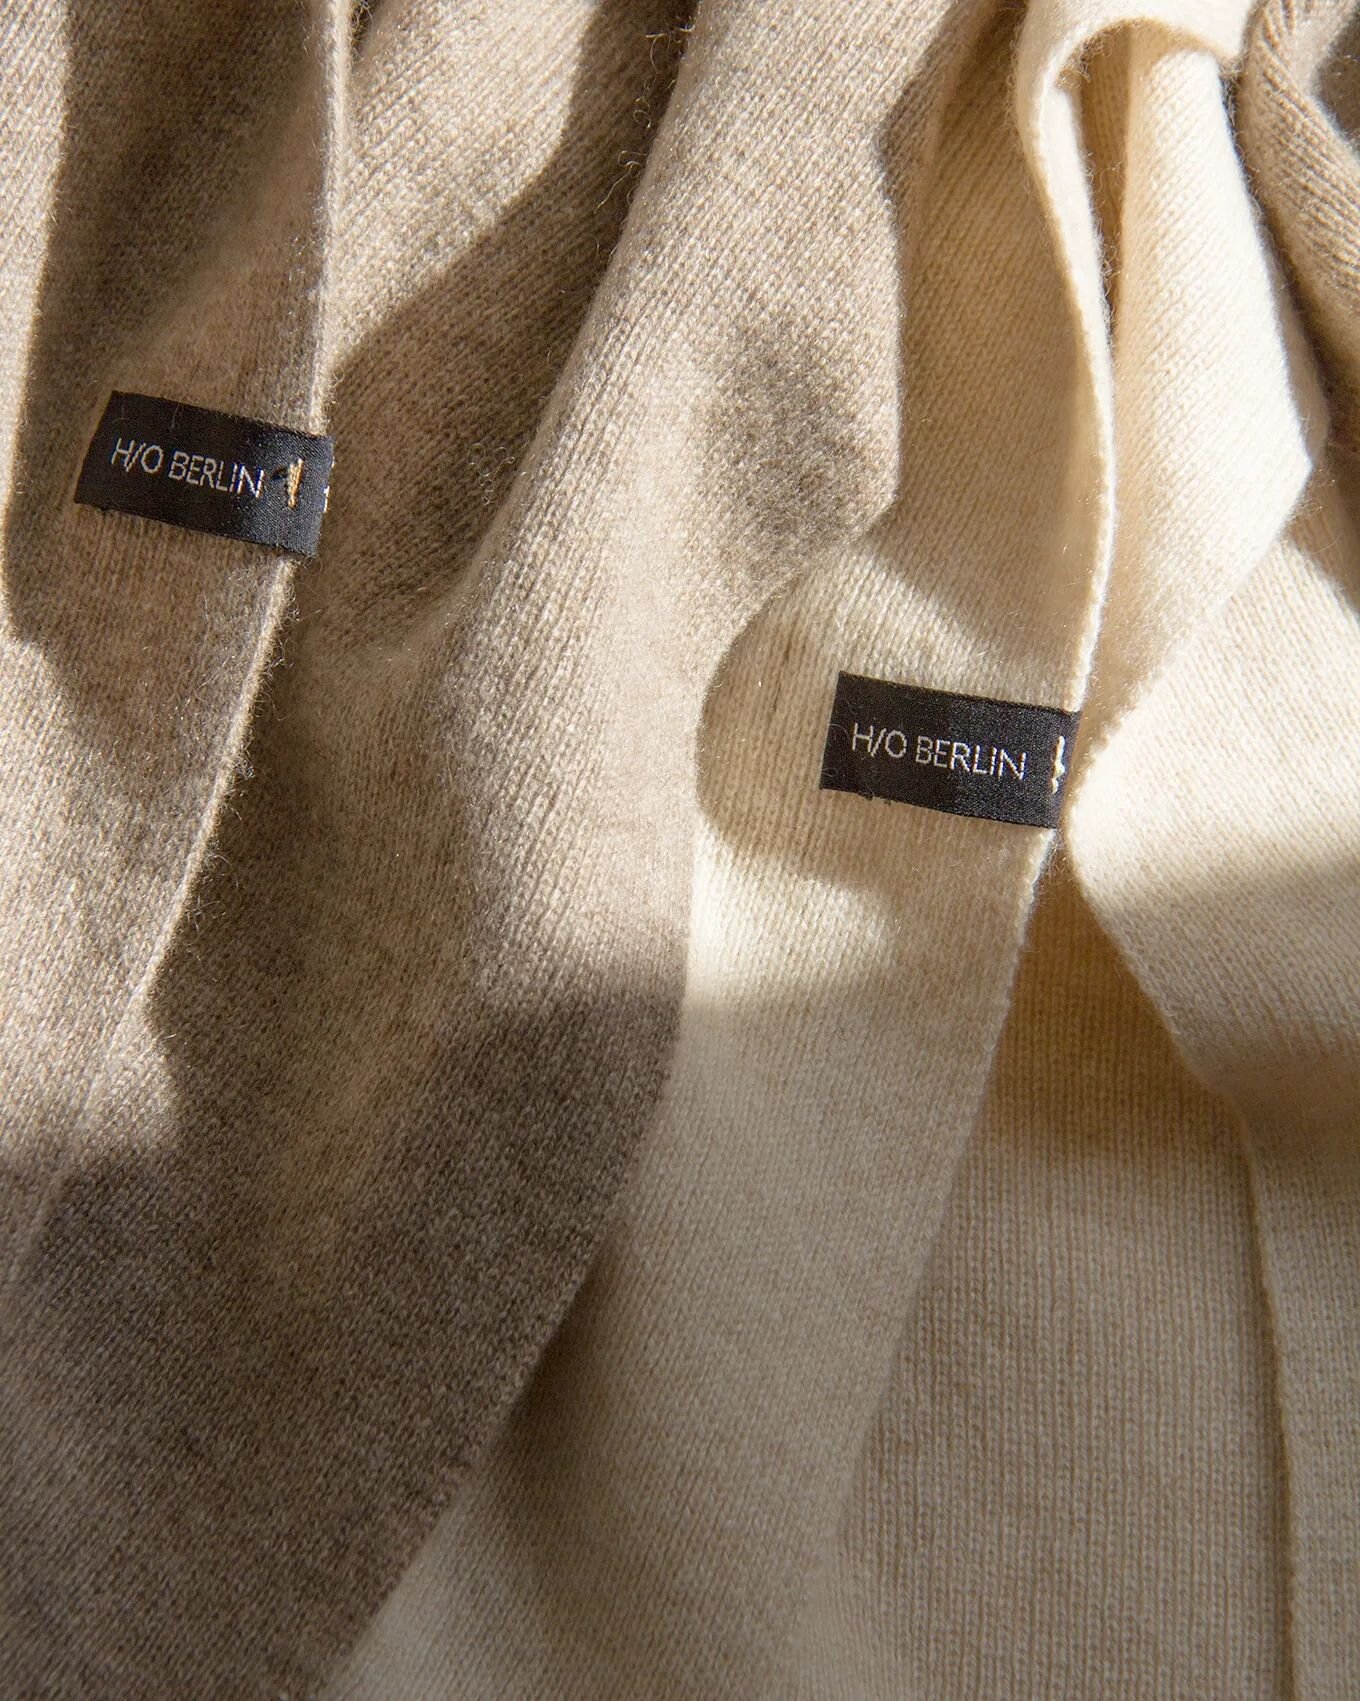 From the softest tans to the deepest brown, stunning array of browns,  straight from the heart of nature. @hoberlin_
Our 100% Mongolian cashmere scarves in natural colour, measuring 200x25cm. It's the perfect accessory for both men and women, offerin